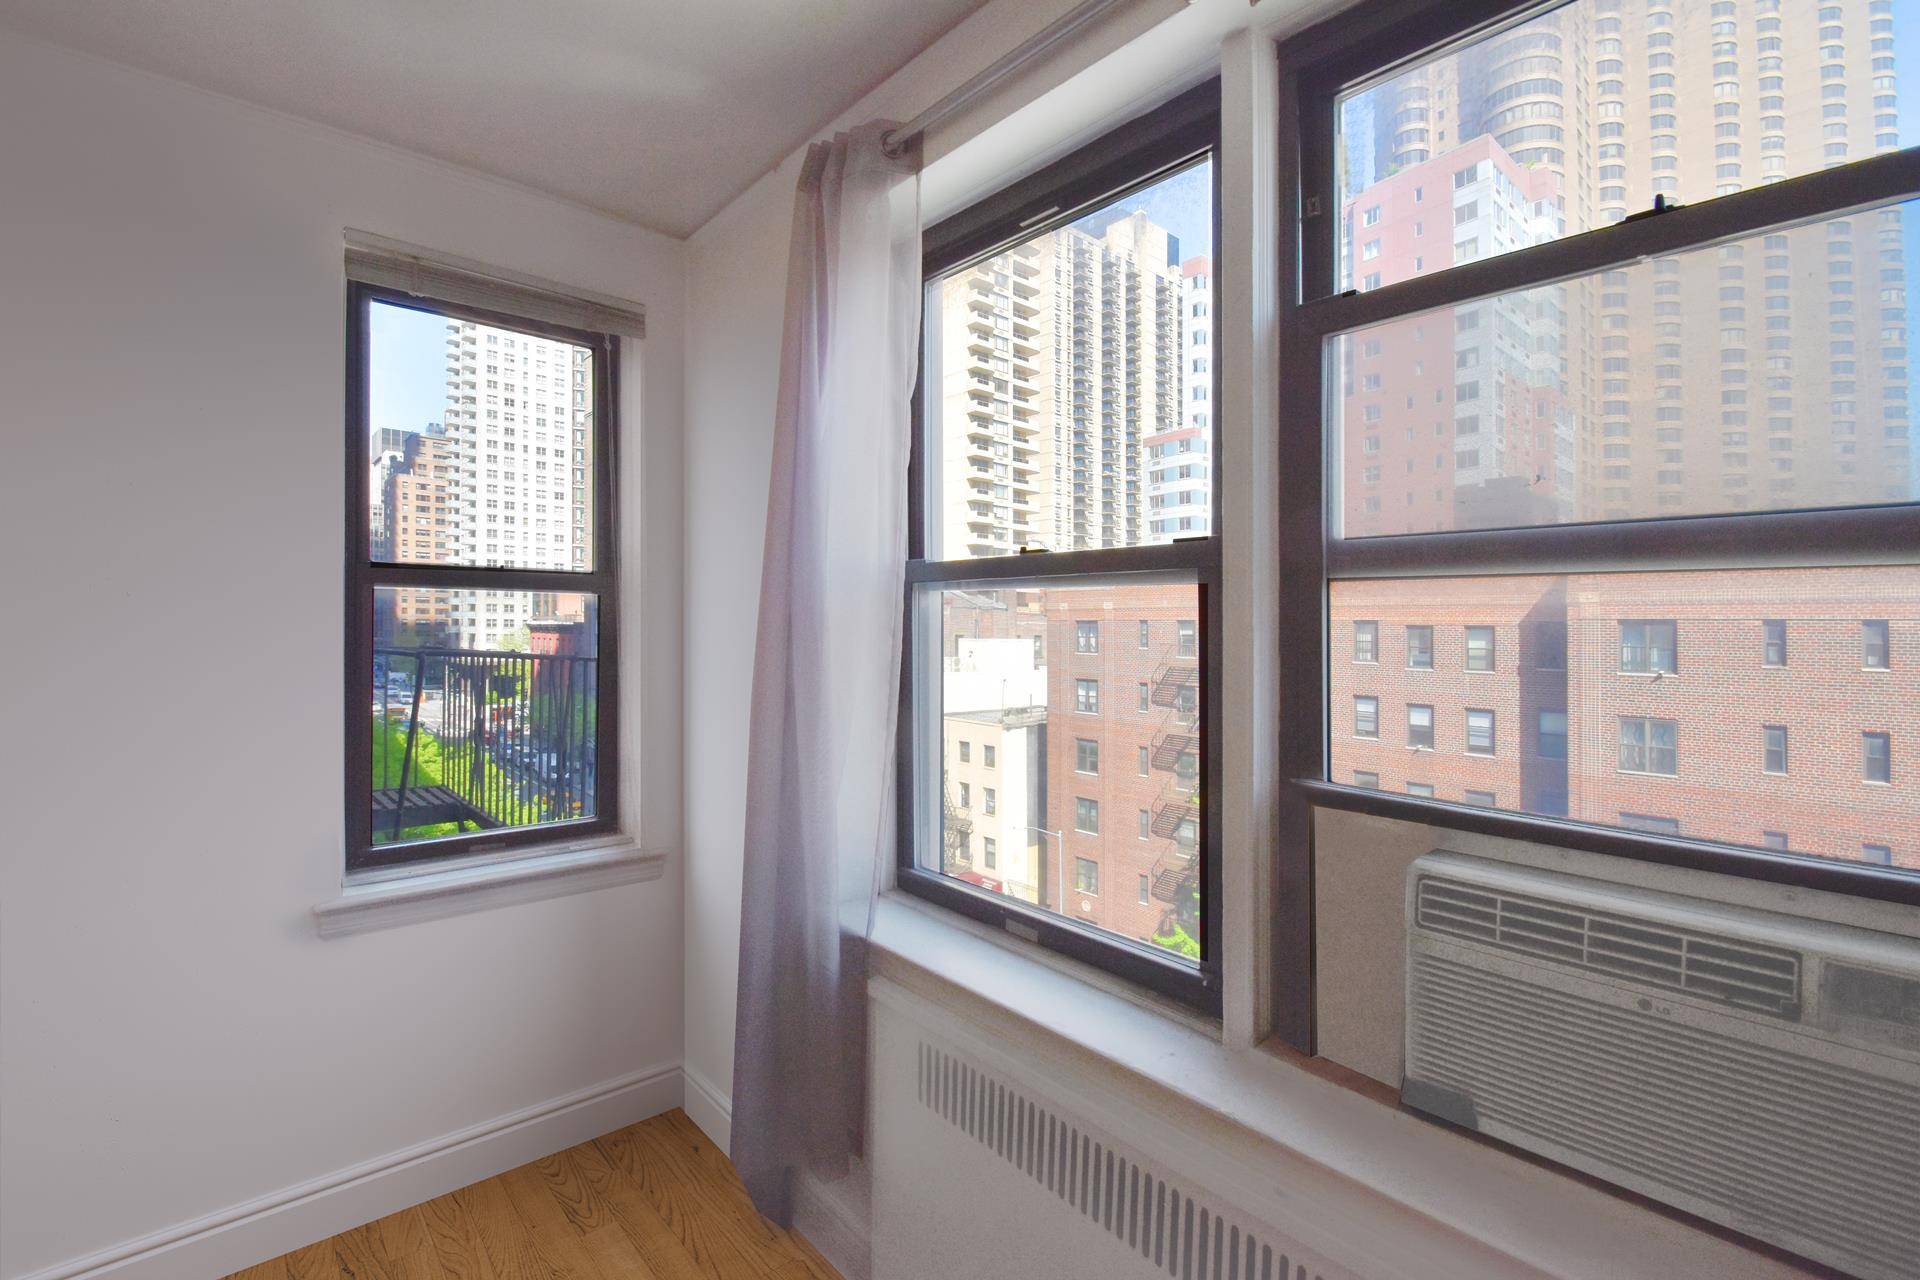 Welcome to 6 H, a spacious one bedroom, one bathroom in prime Murray Hill.